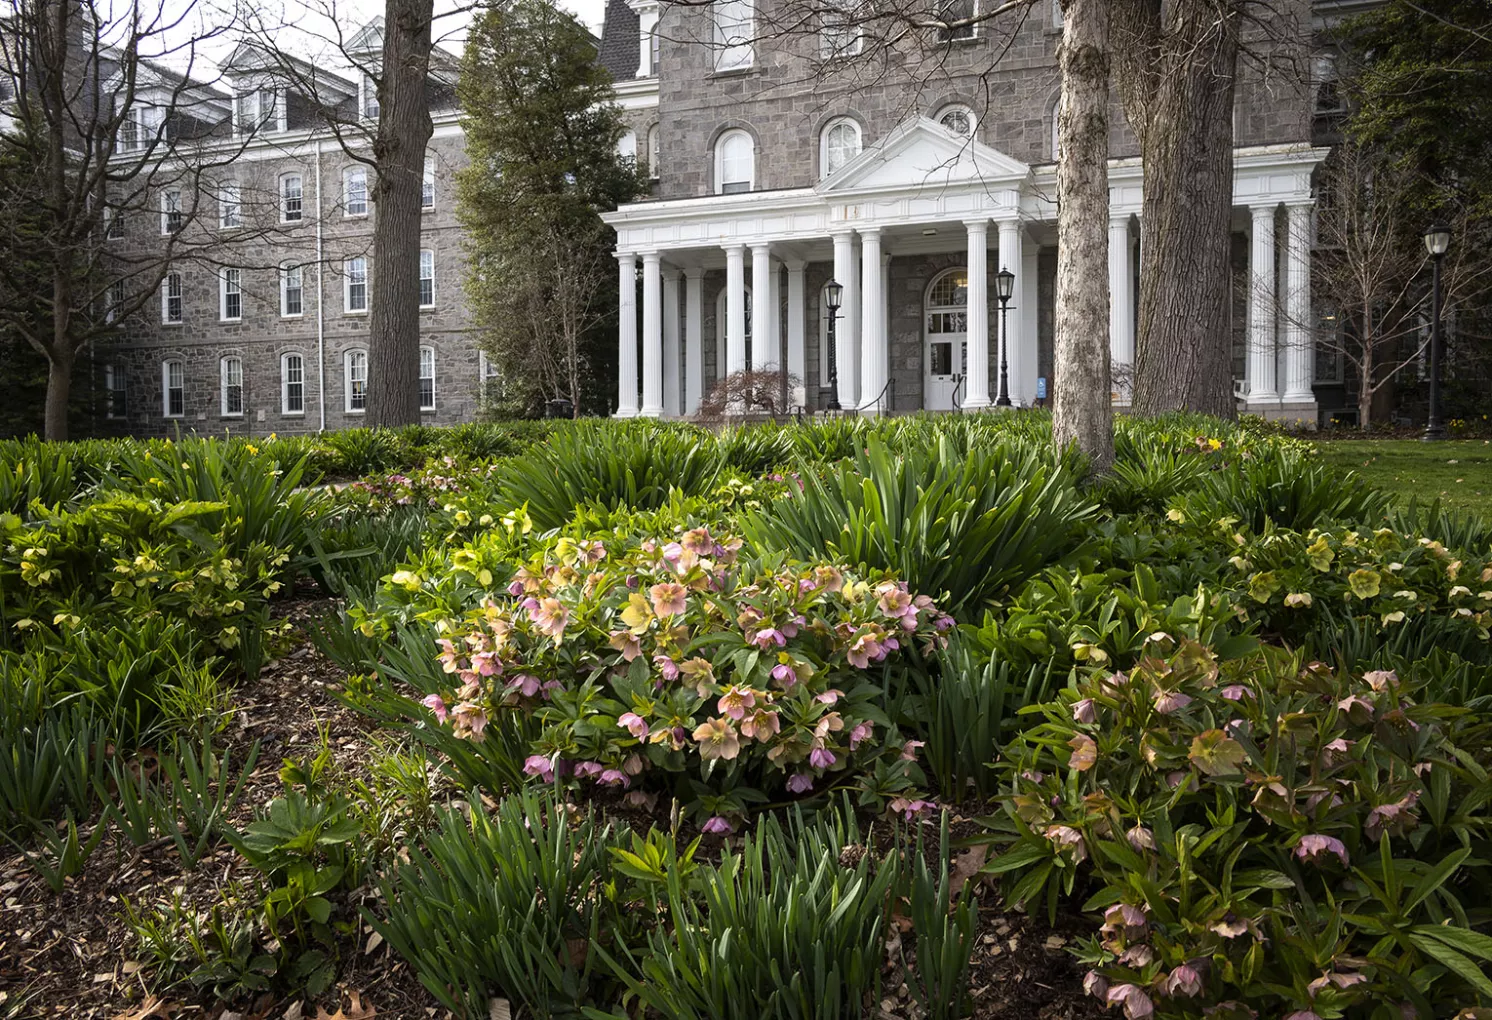 parrish hall in the spring